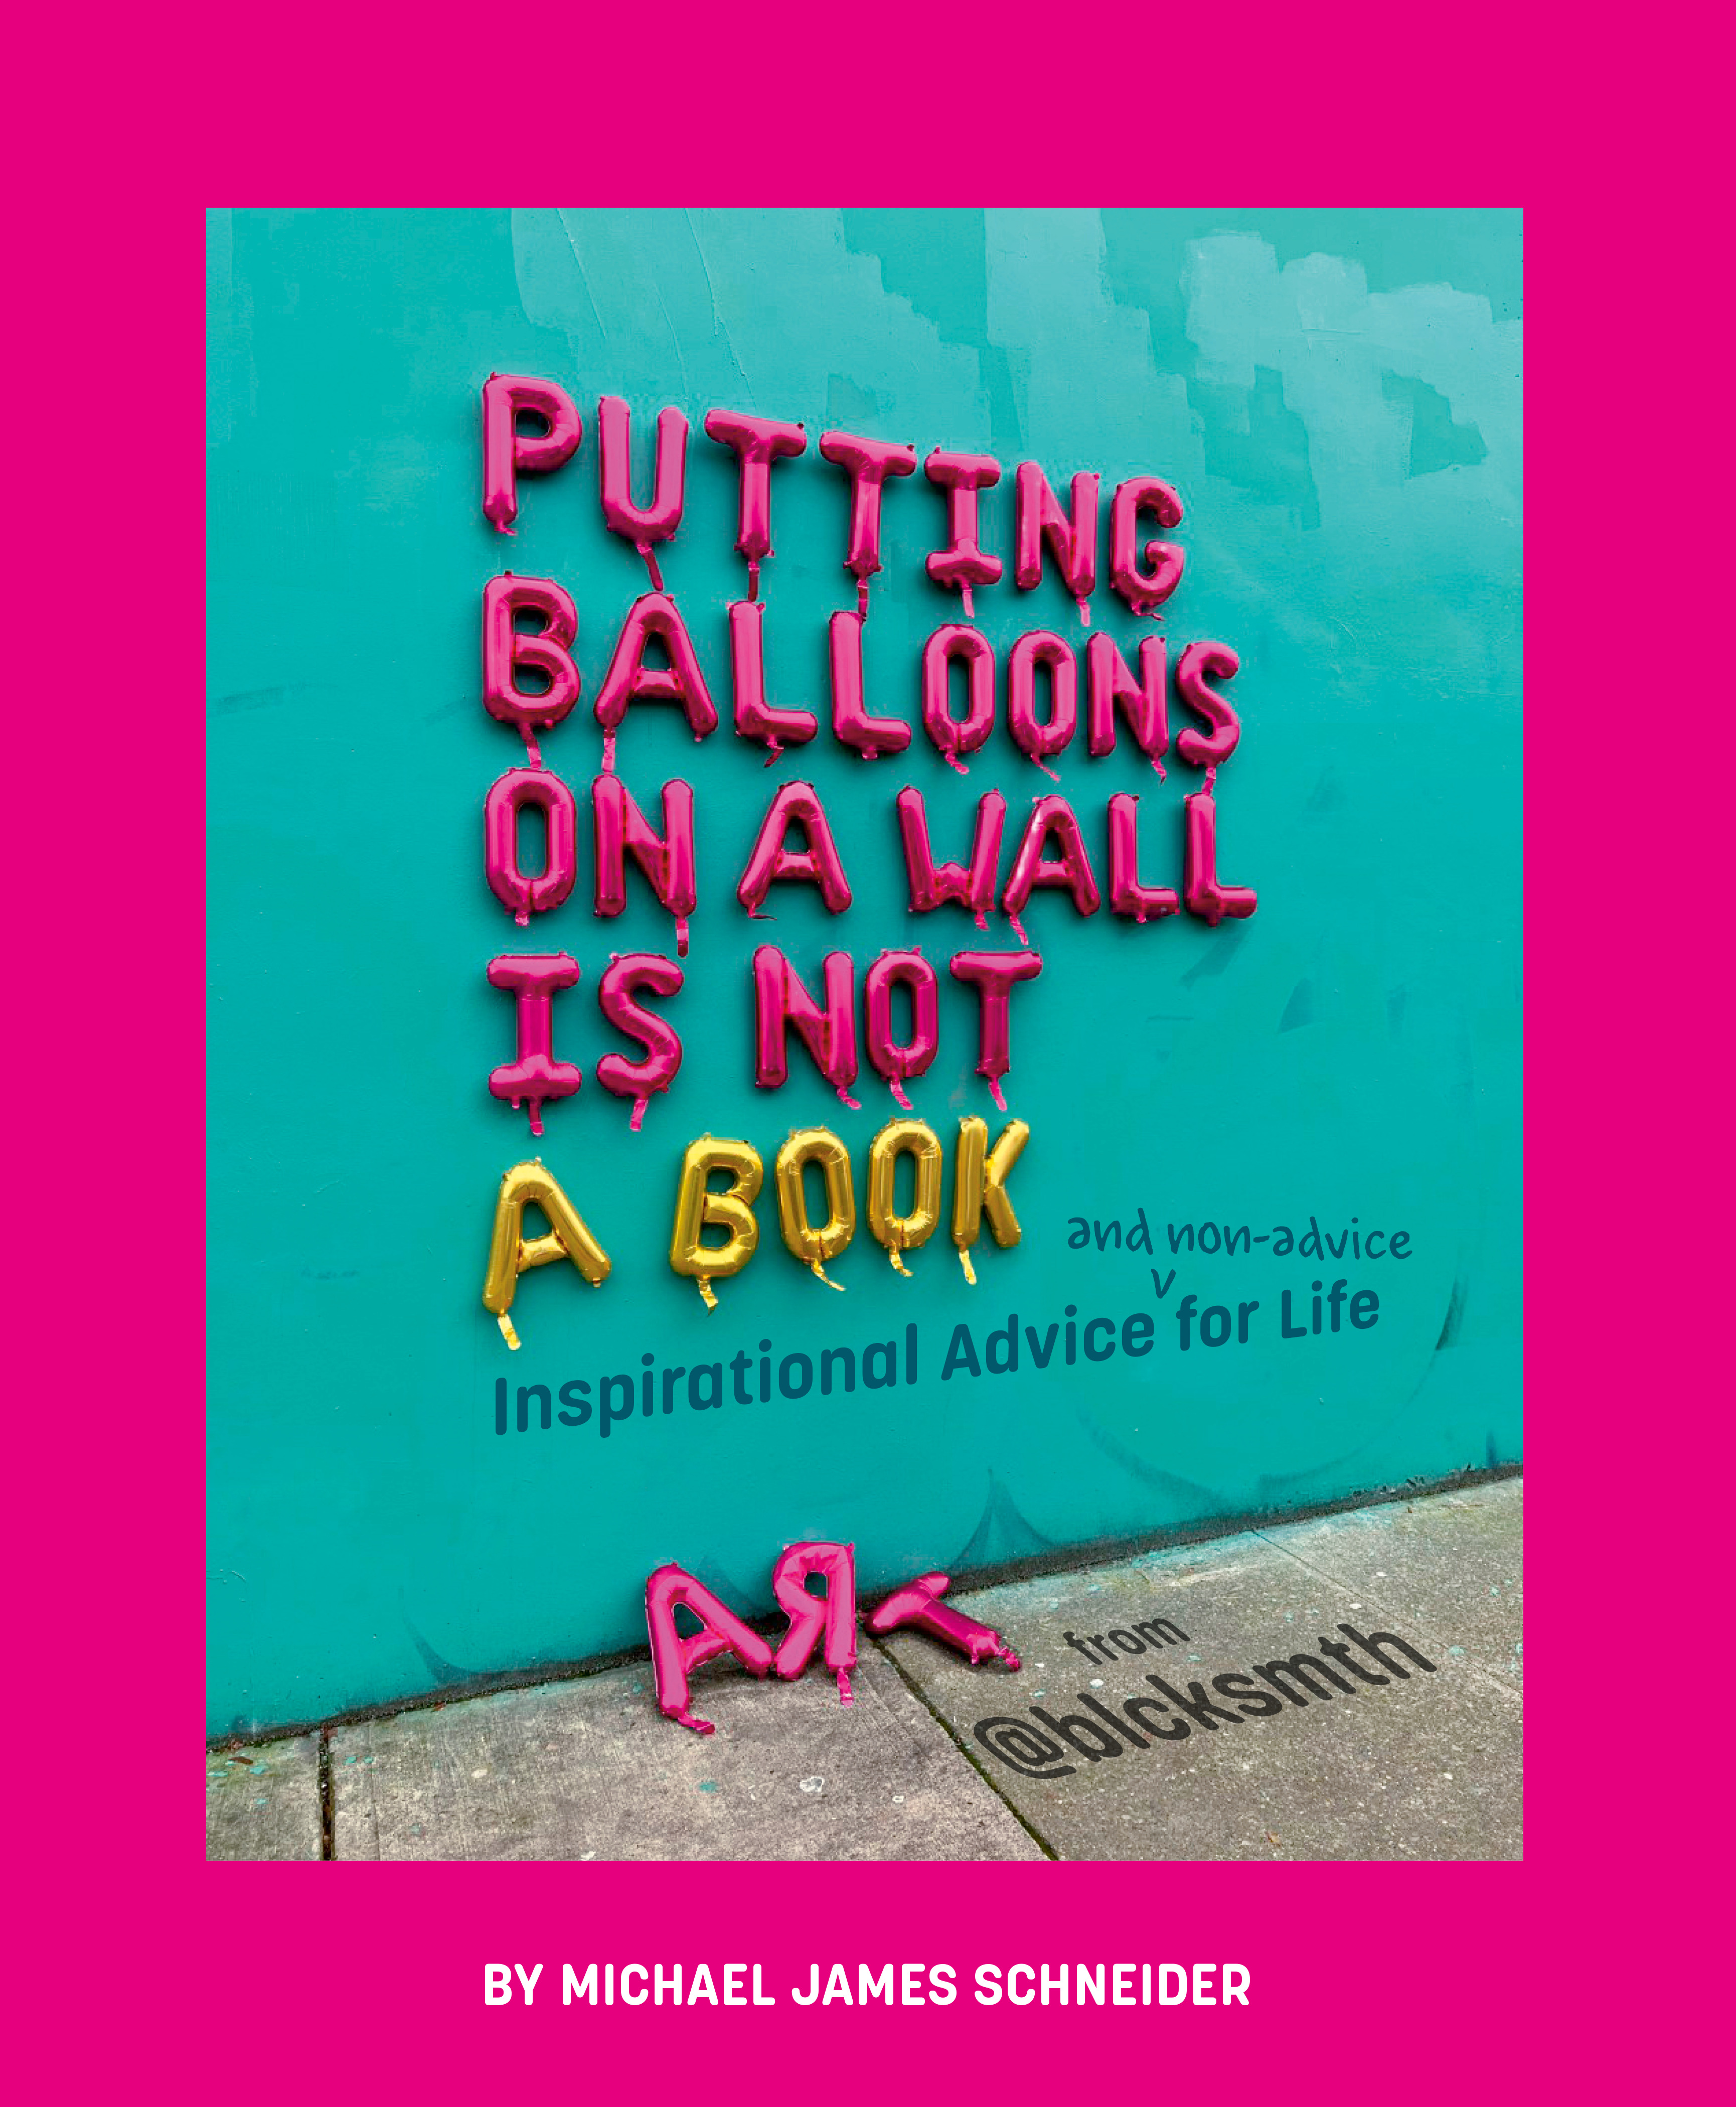 PUTTING BALLOONS ON A WALL IS NOT A BOOK, by SCHNEIDER, MICHAEL JAMES